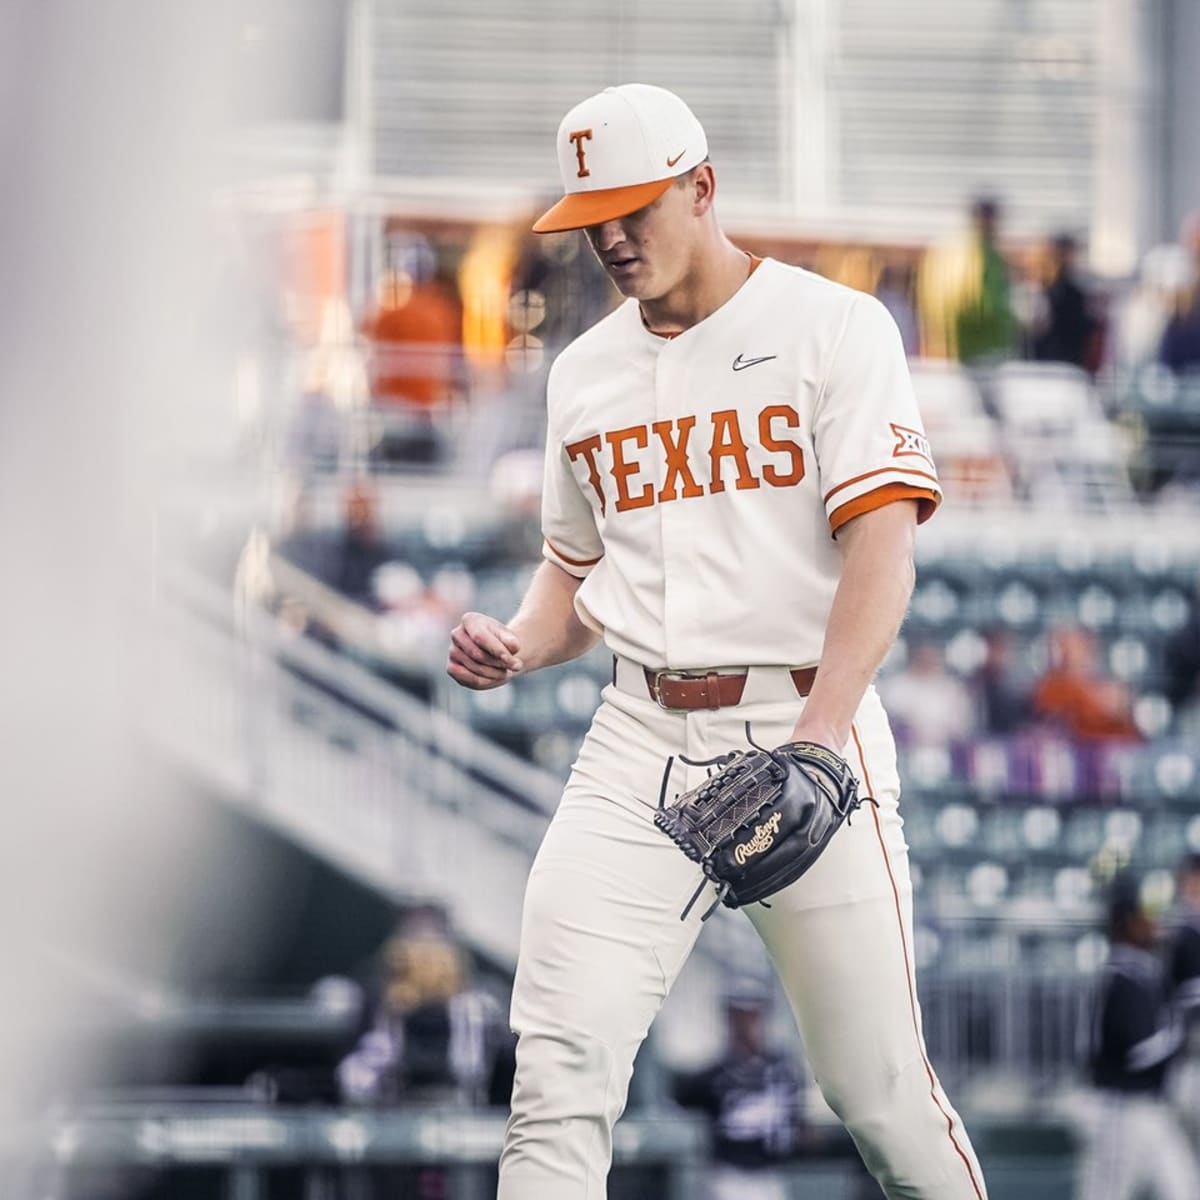 Texas Longhorns baseball: 10 straight wins after sweep of New Orleans